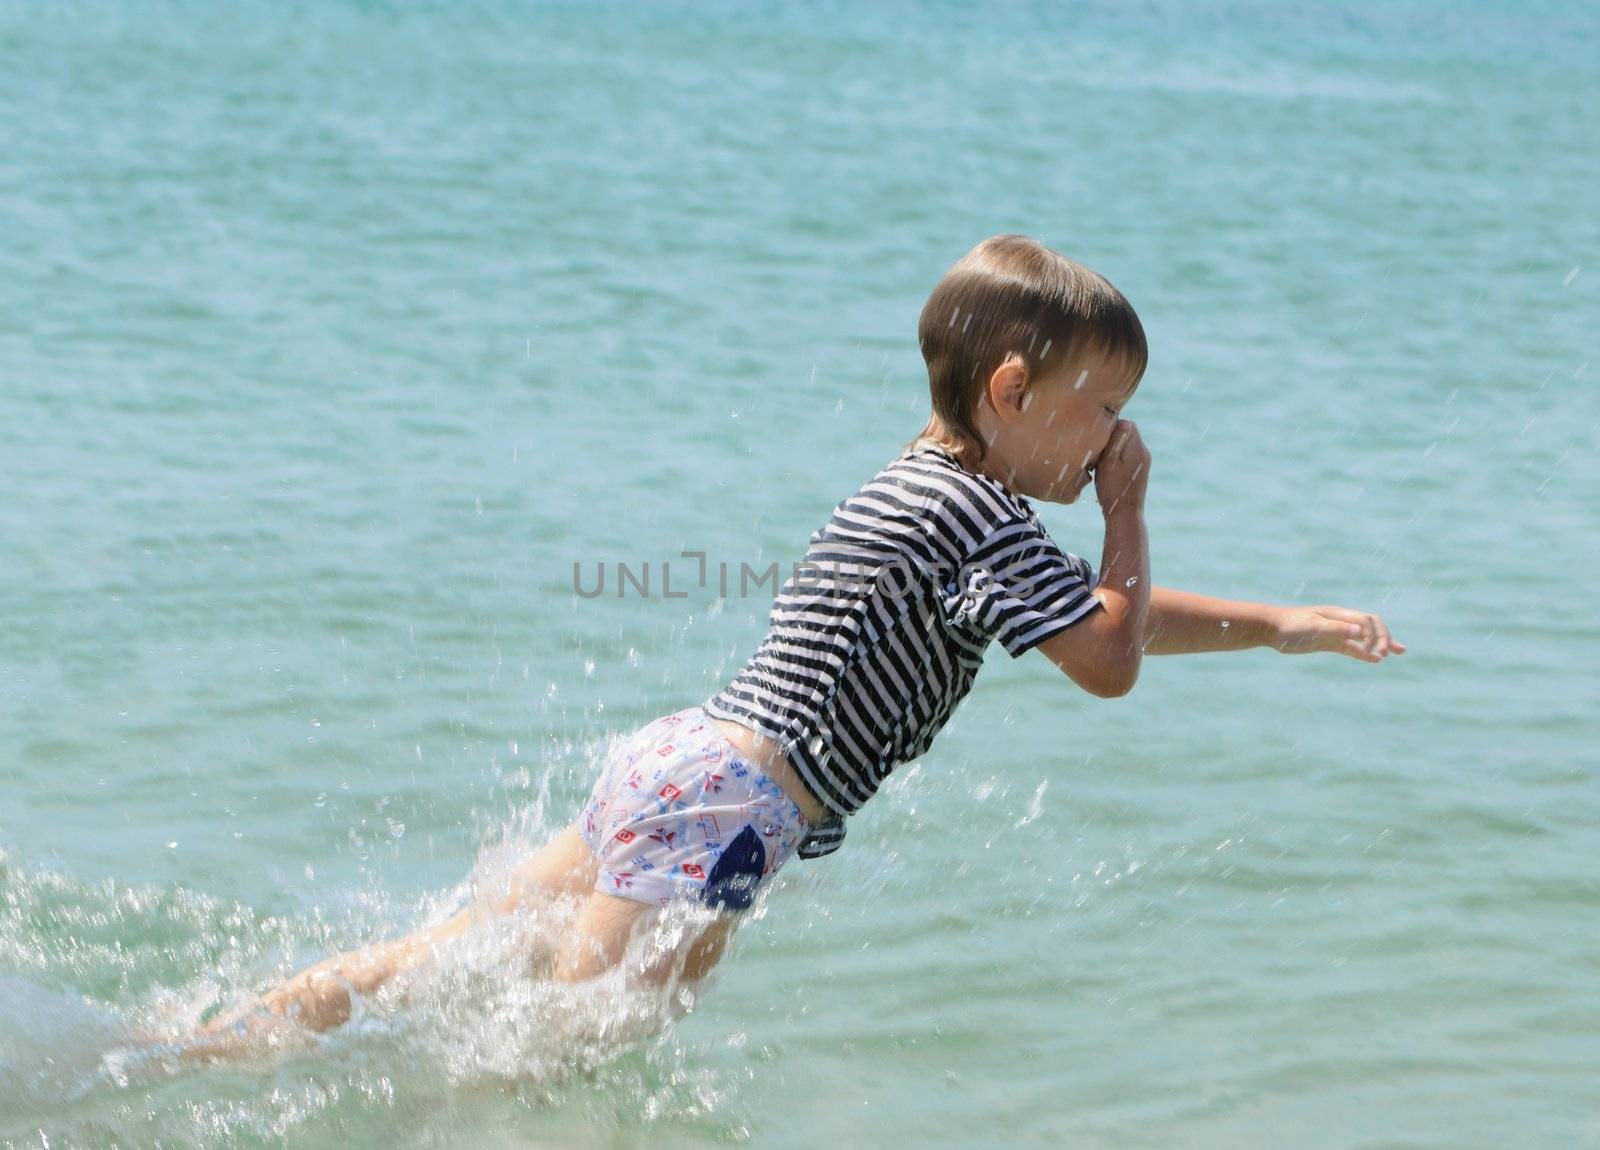 The small child jumps in water